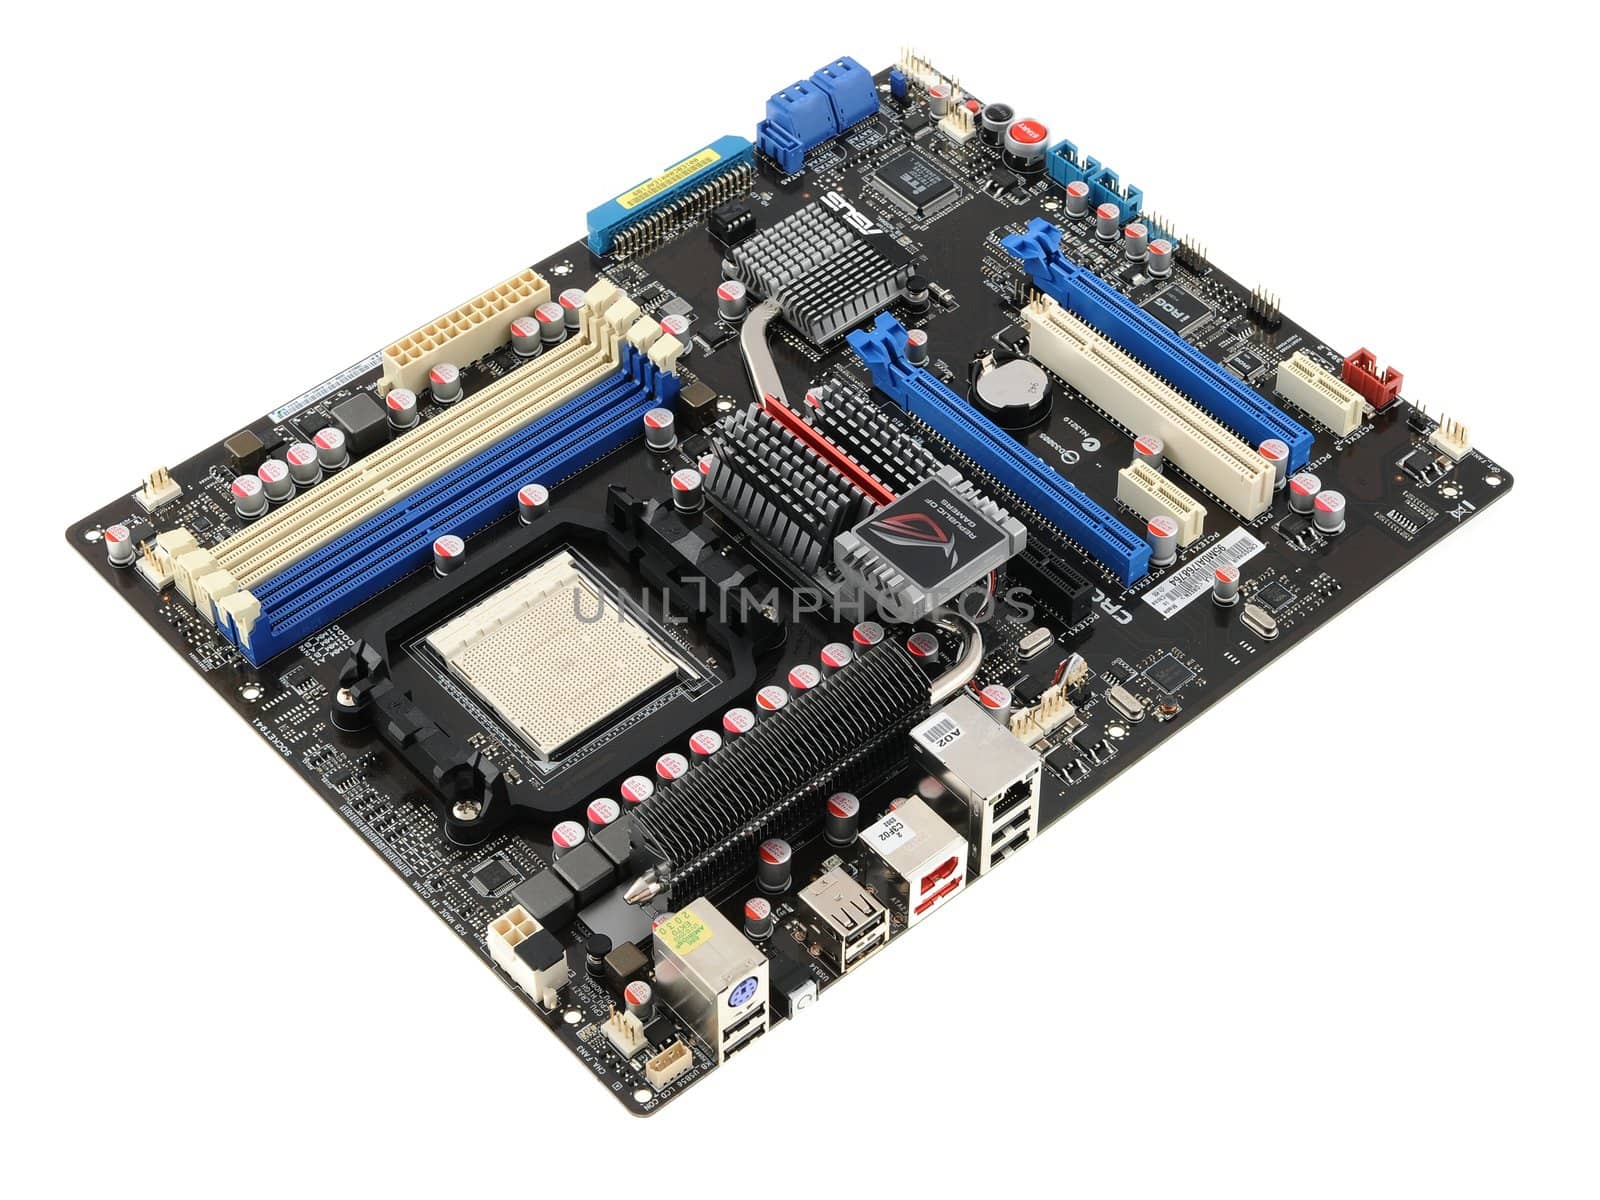 Computer component - motherboard - isolated in the white background